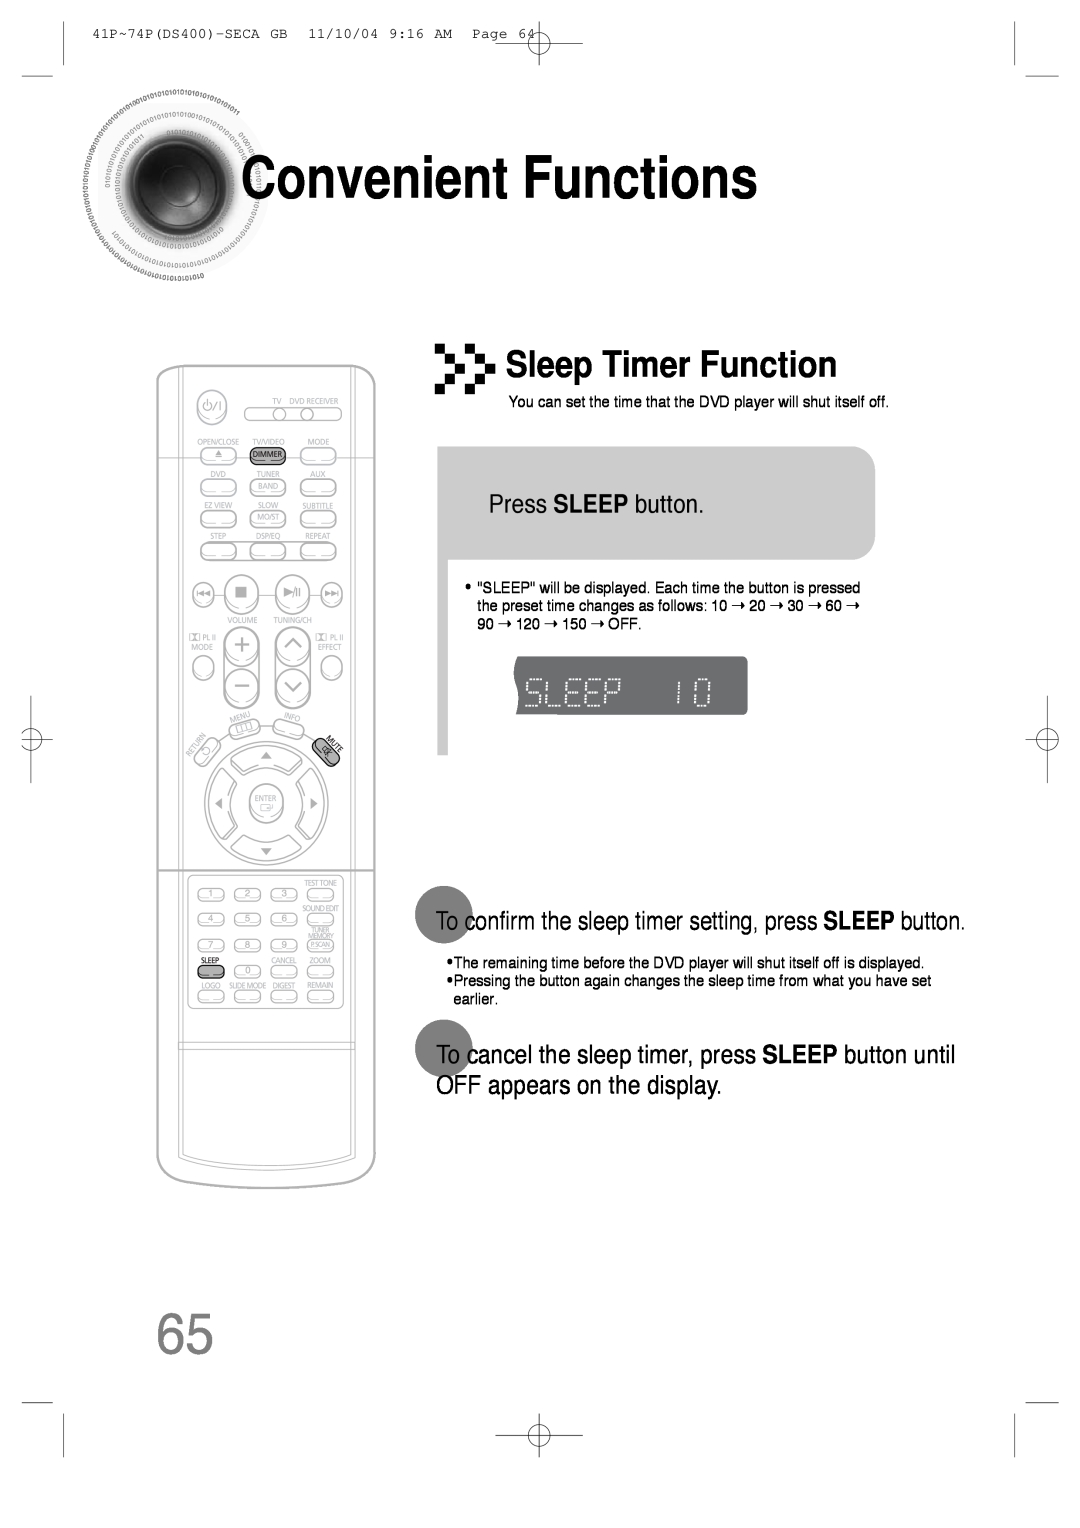 Samsung HT-DS400 ConvenientFunctions, Sleep Timer Function, Press SLEEP button, OFF appears on the display 